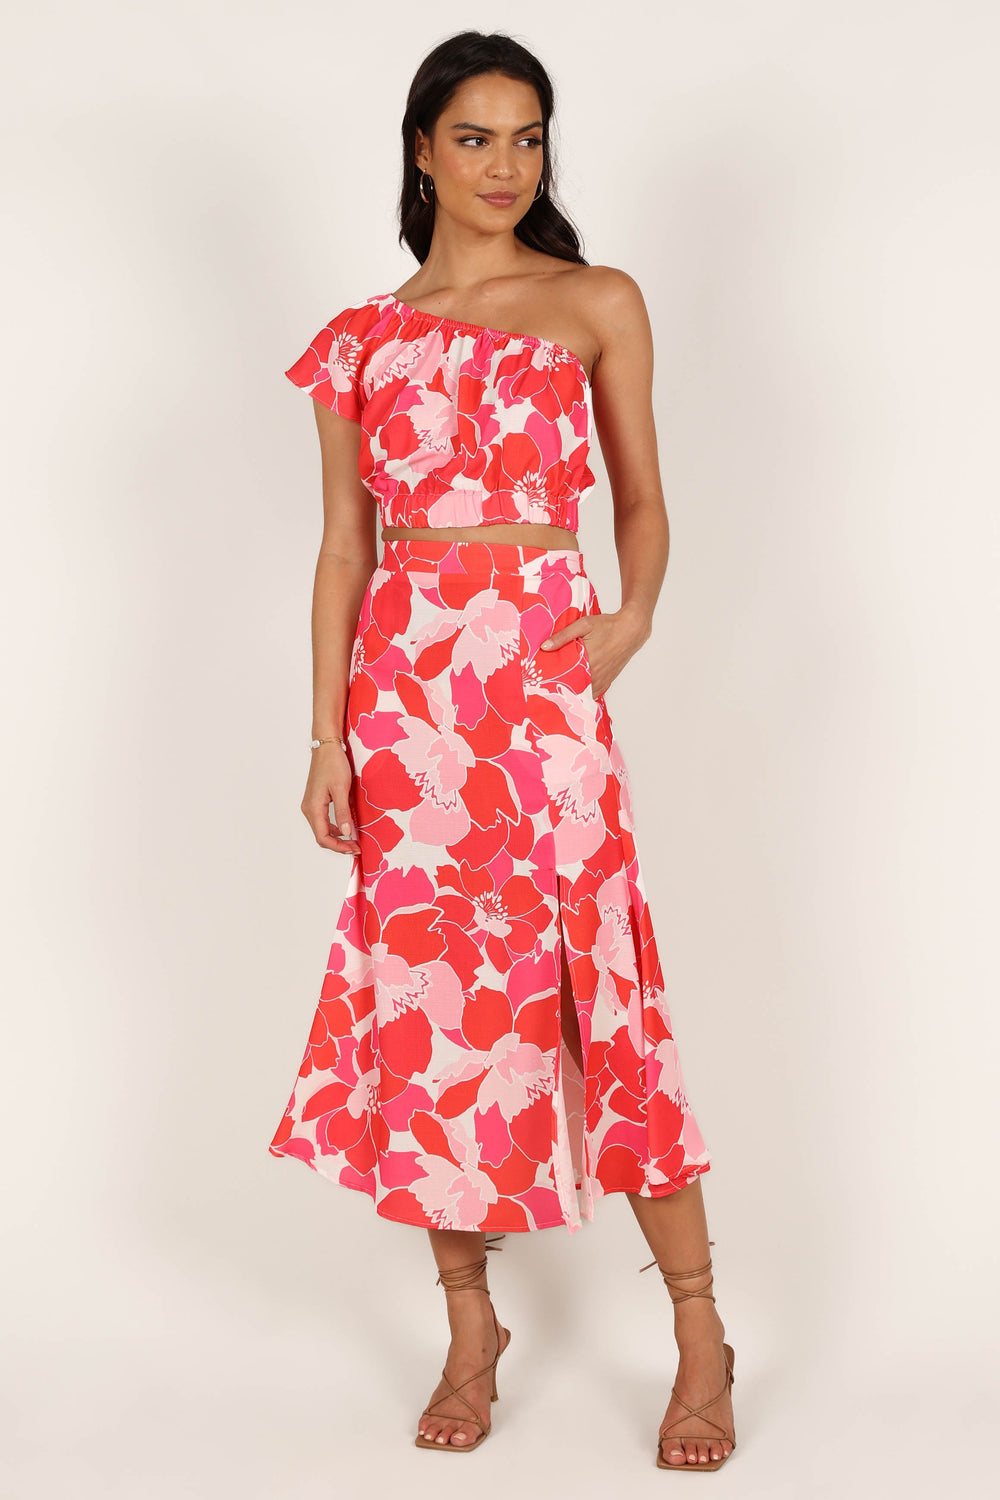 SETS @Bianca Two Piece Set - Pink/Red Floral